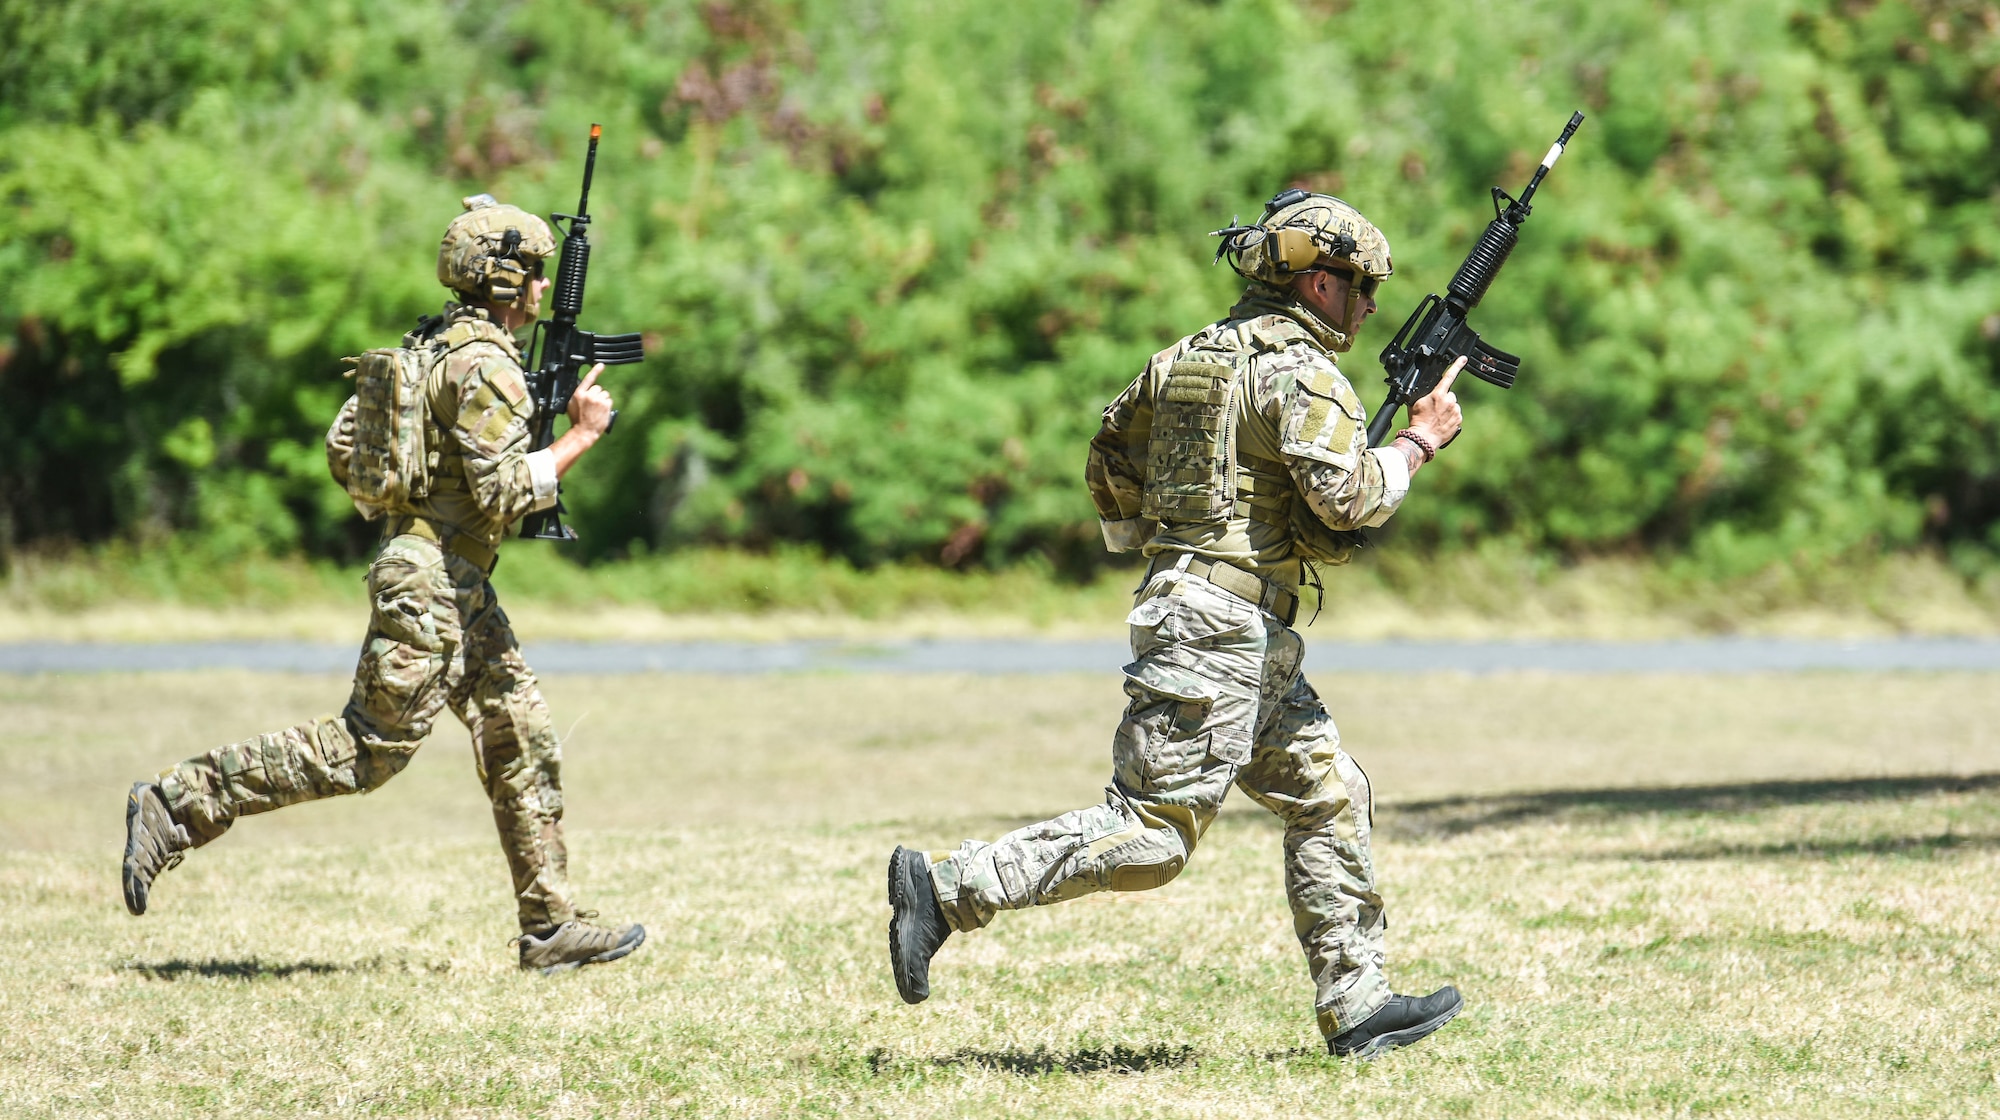 Airmen from the 25th Air Support Operations Squadron conduct field training exercises at Bellows Air Force Station, Hawaii, July 29, 2020. Airmen were evaluated on communication skills and tactical movements in a simulated combat environment. (U.S. Air Force photo by Tech. Sgt. Anthony Nelson Jr.)